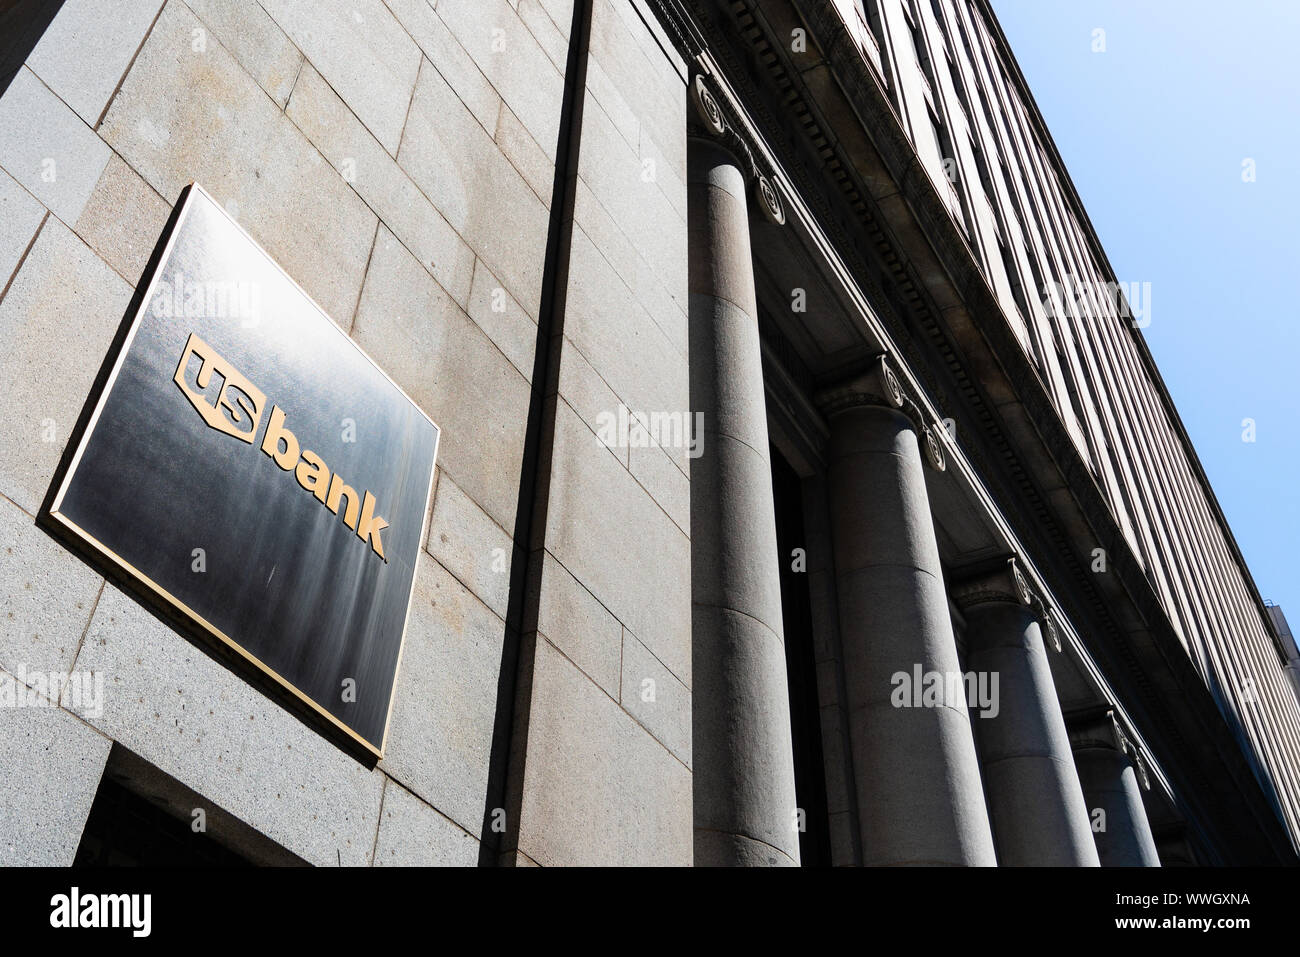 August 21, 2019 San Francisco / CA / USA - US Bank branch located in the Financial District Stock Photo